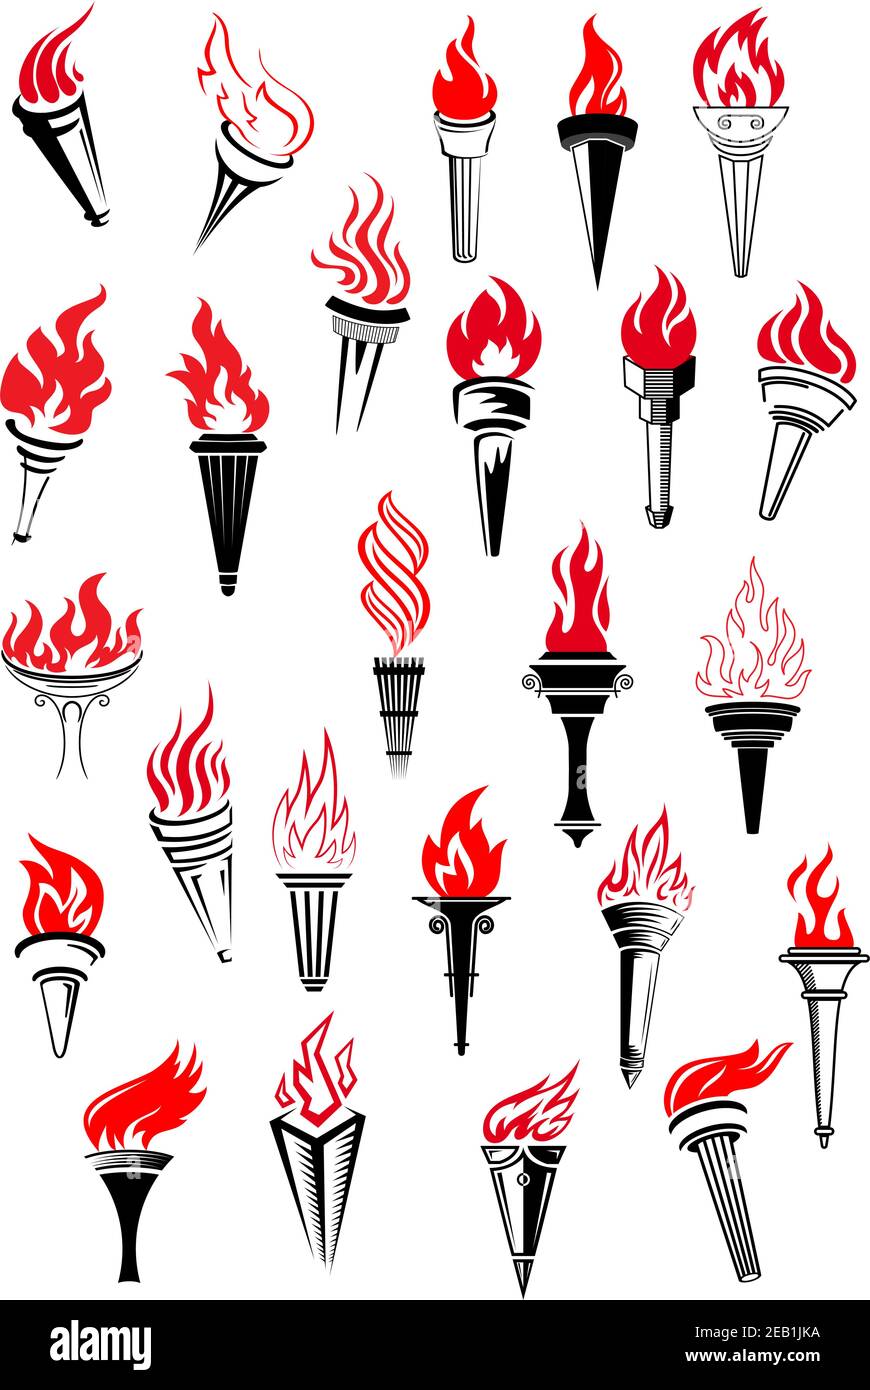 Flaming torches in vintage style for peace, sport, heraldic and history design Stock Vector